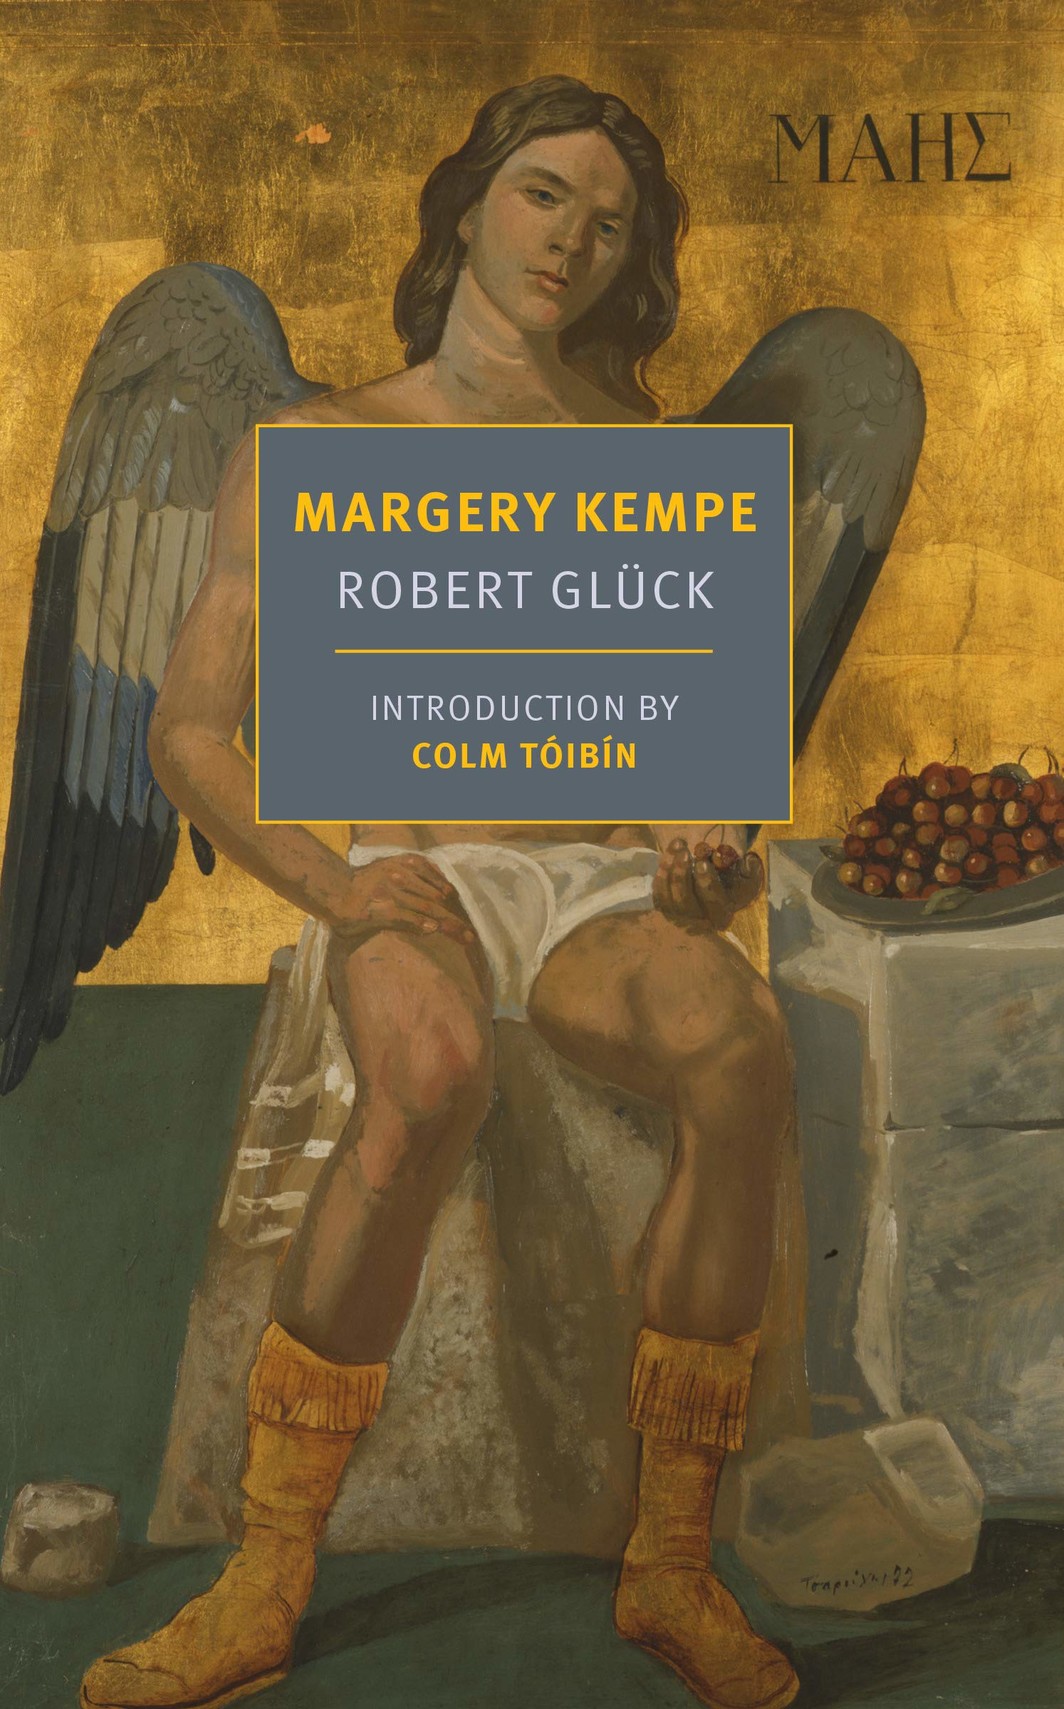 The cover of Margery Kempe